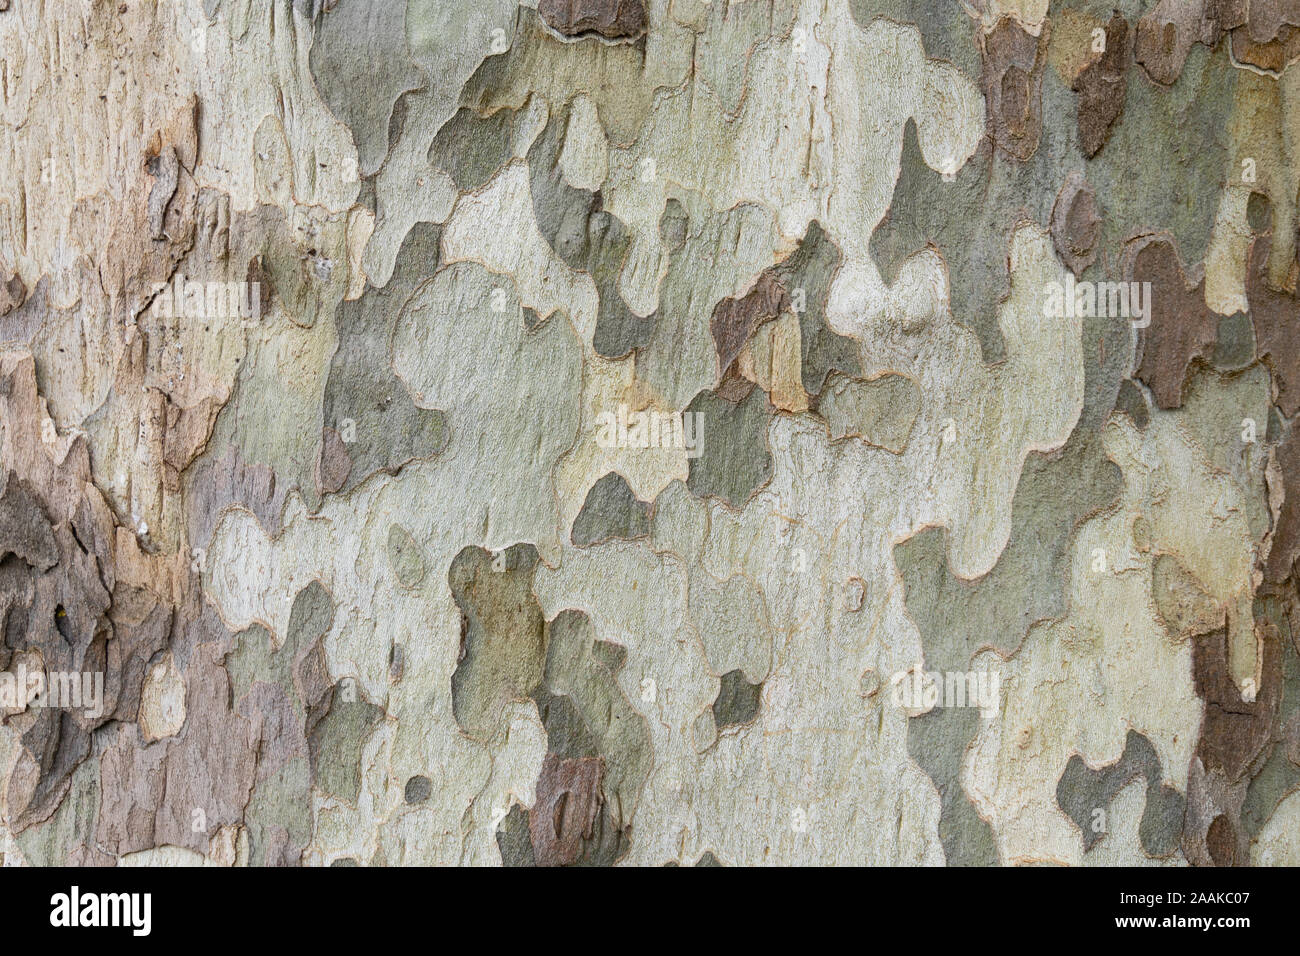 A tree with a camouflage look Stock Photo